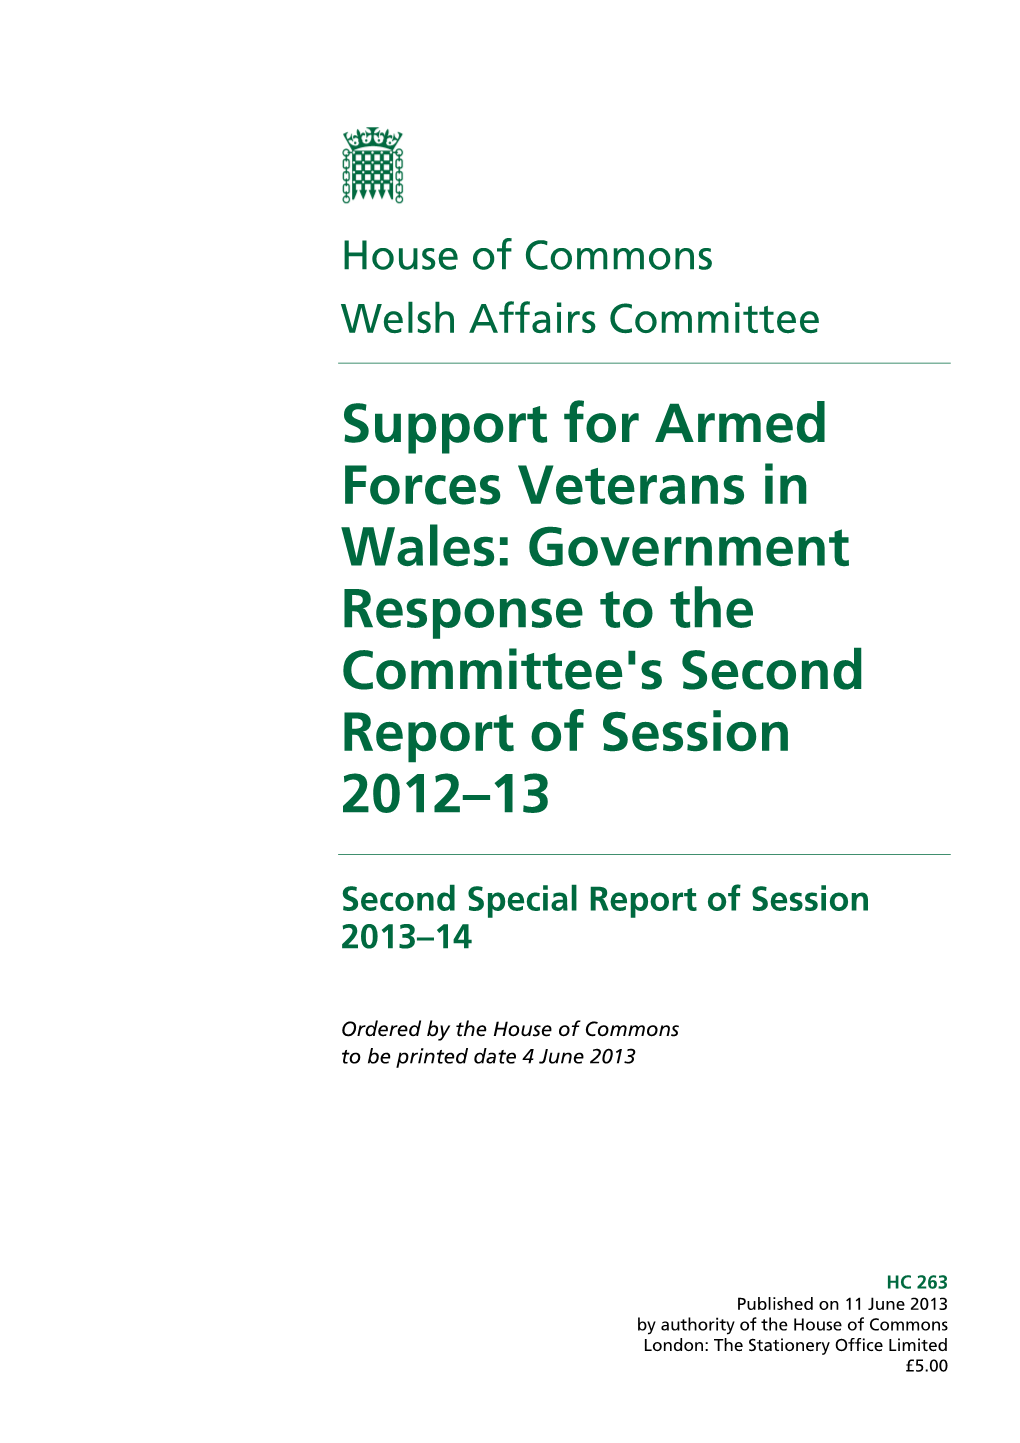 Support for Armed Forces Veterans in Wales: Government Response to the Committee's Second Report of Session 2012–13